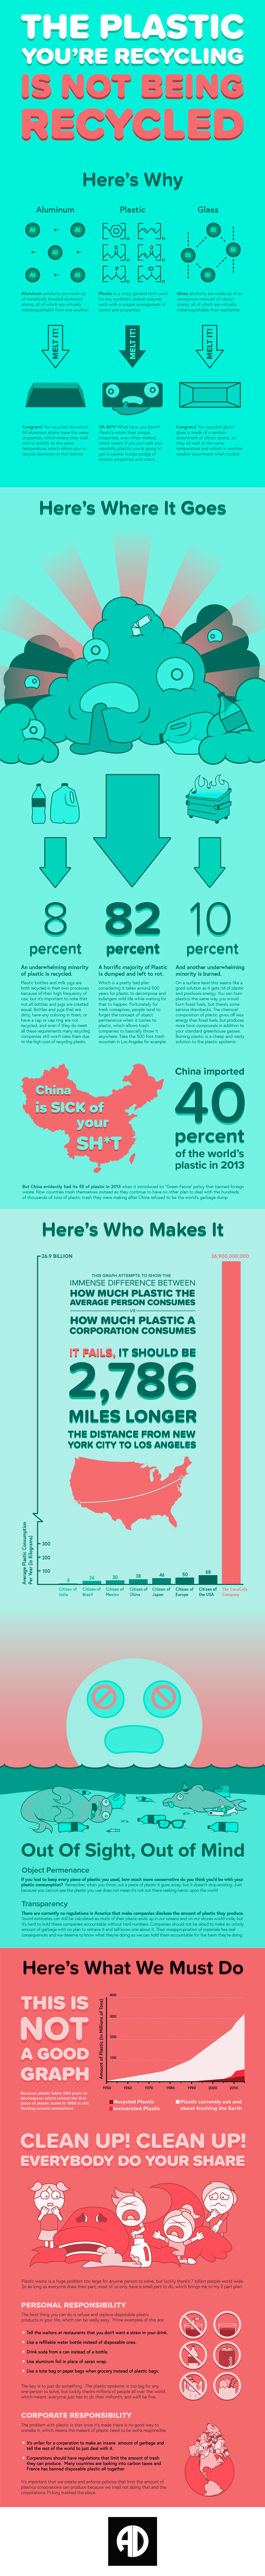 Your Plastic is not being Recycled [Infographic] | ecogreenlove